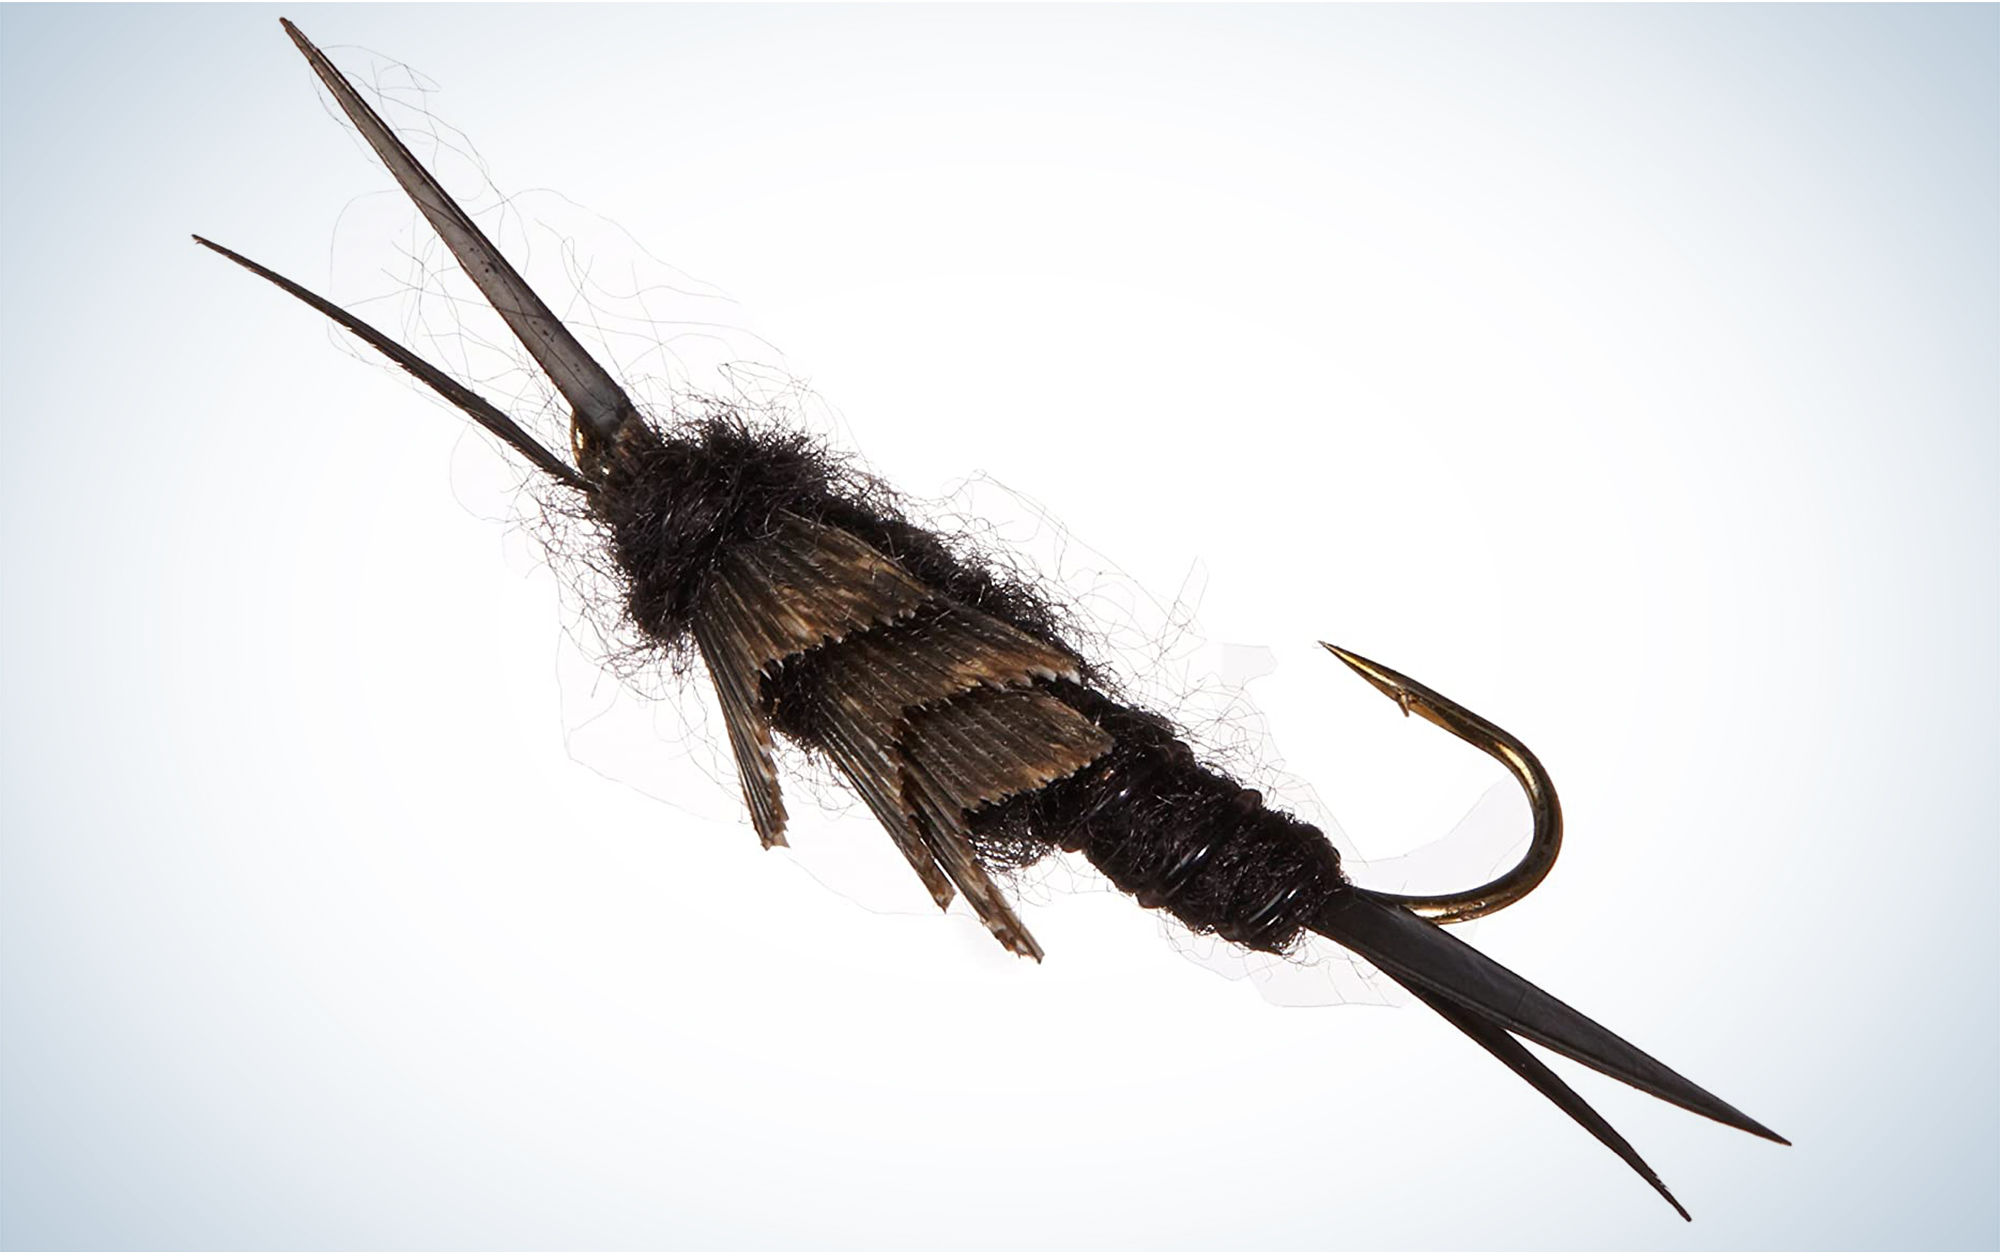 The Black Stonefly is one of the best winter flies.